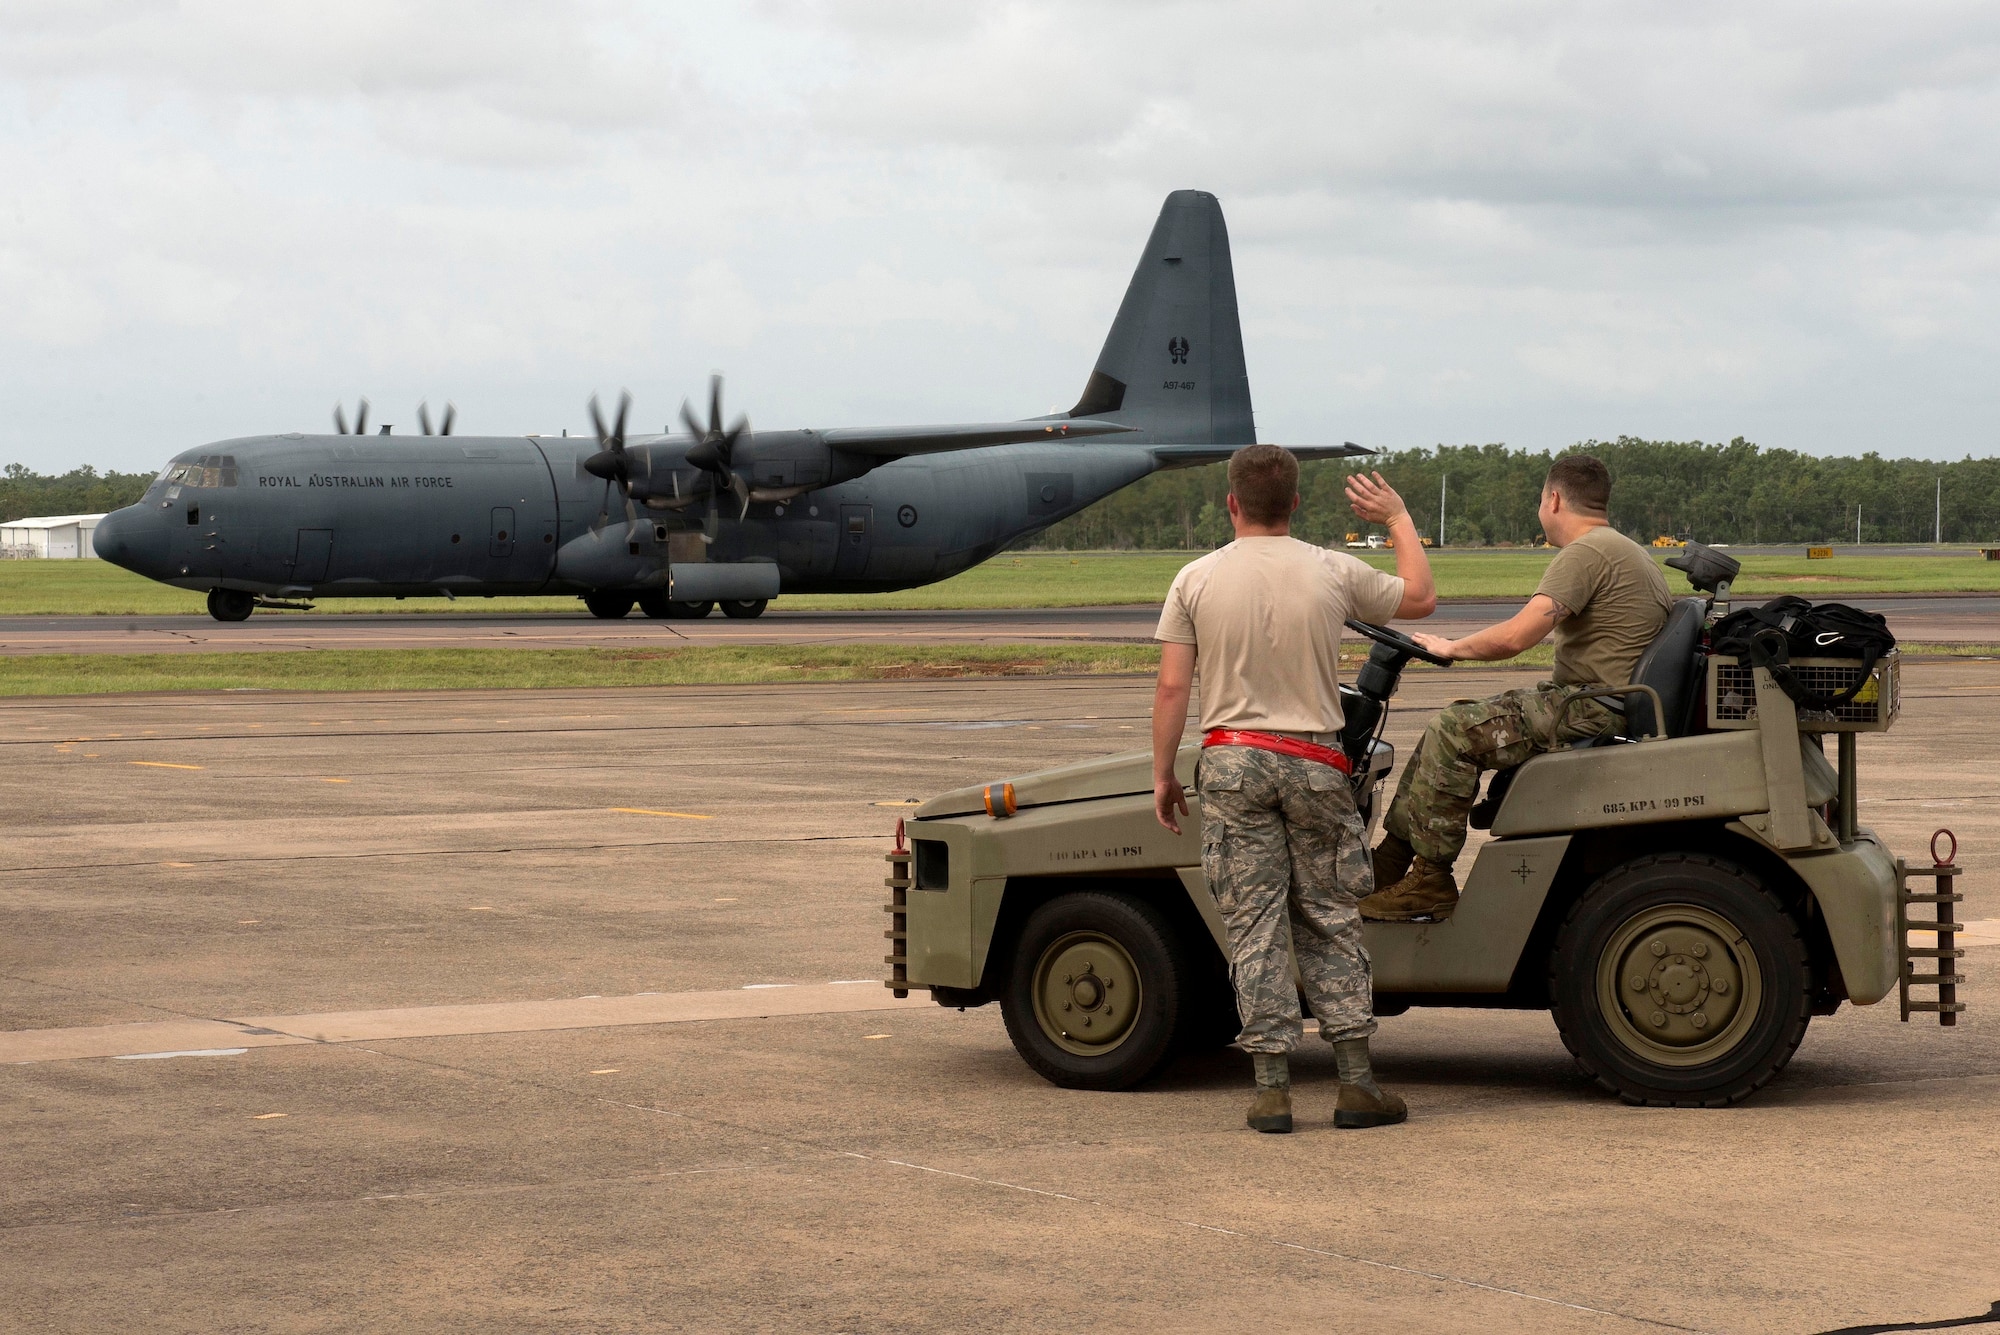 U.S. Airmen assigned to the 5th Maintenance Group wave at a passing Royal Australian Air Force (RAAF) C-130 Hercules during Diamond Shield 2019 (DS-19) at RAAF Base Darwin, Australia, March 26, 2019.